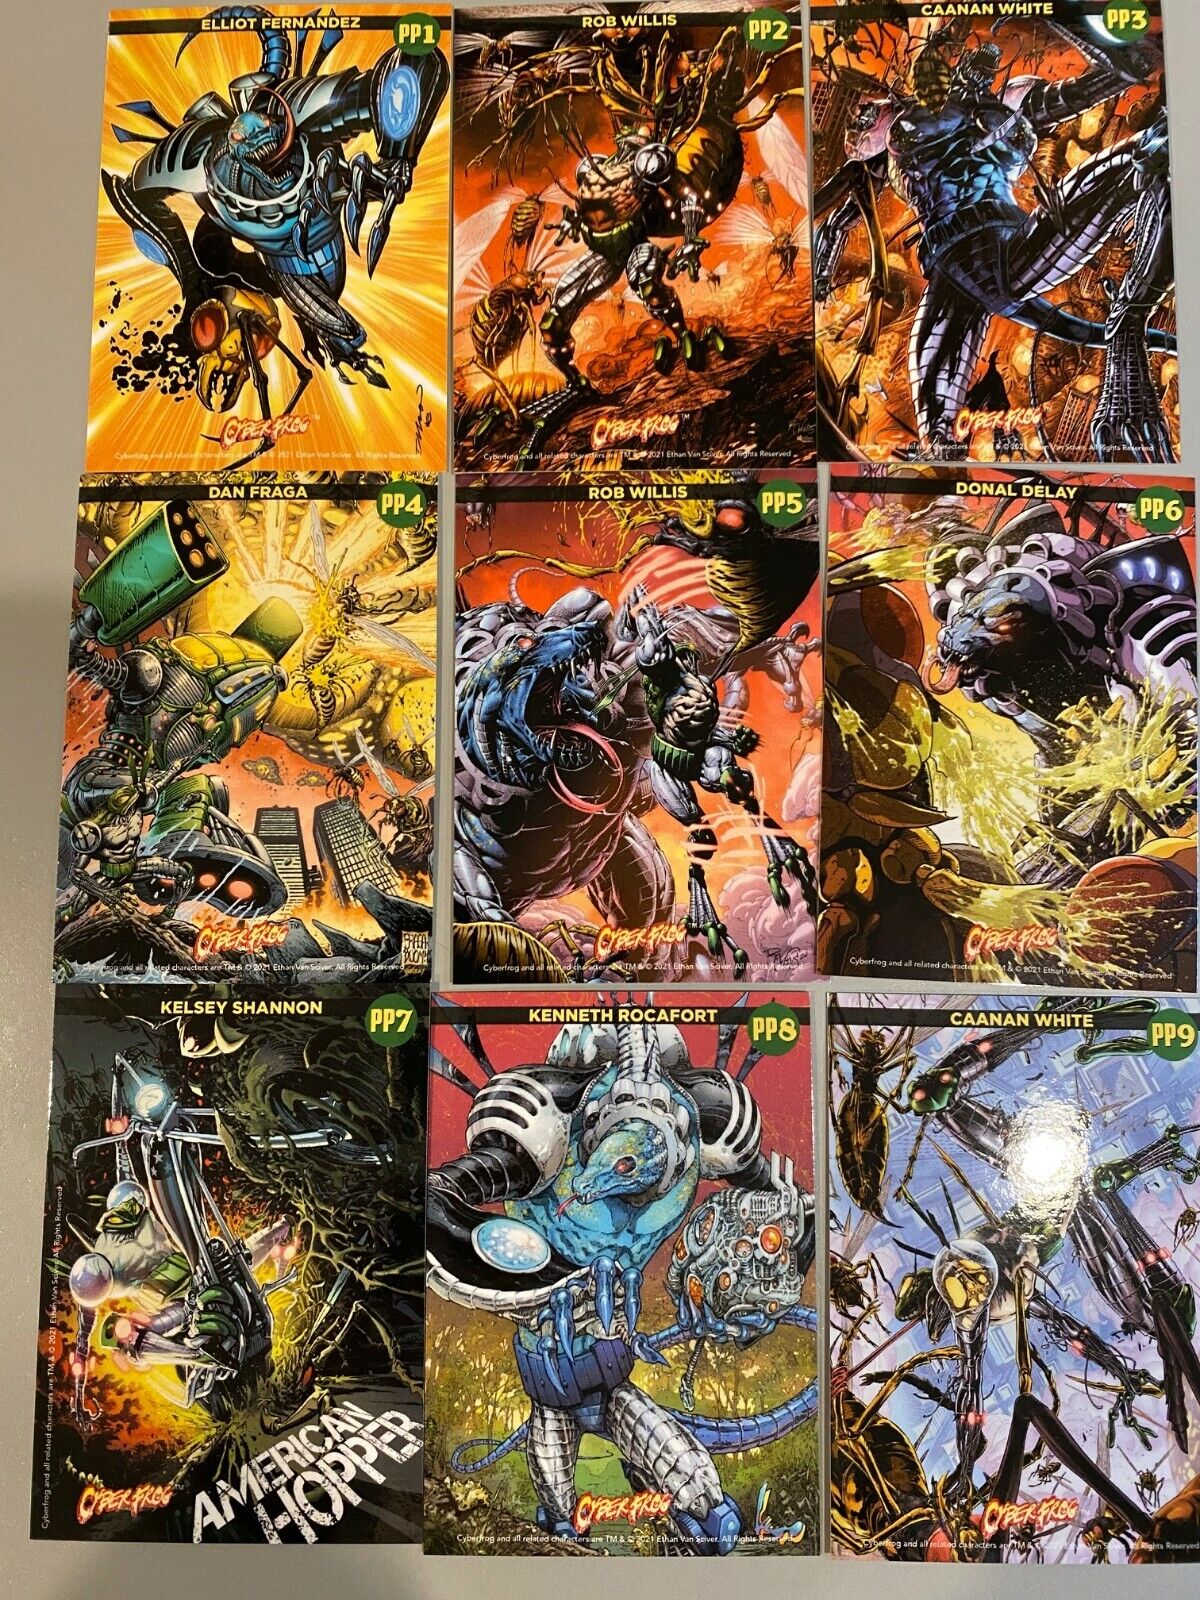 CYBERFROG PATREON PUZZLE #1 PP1-9 trading card set 9 CARDS.